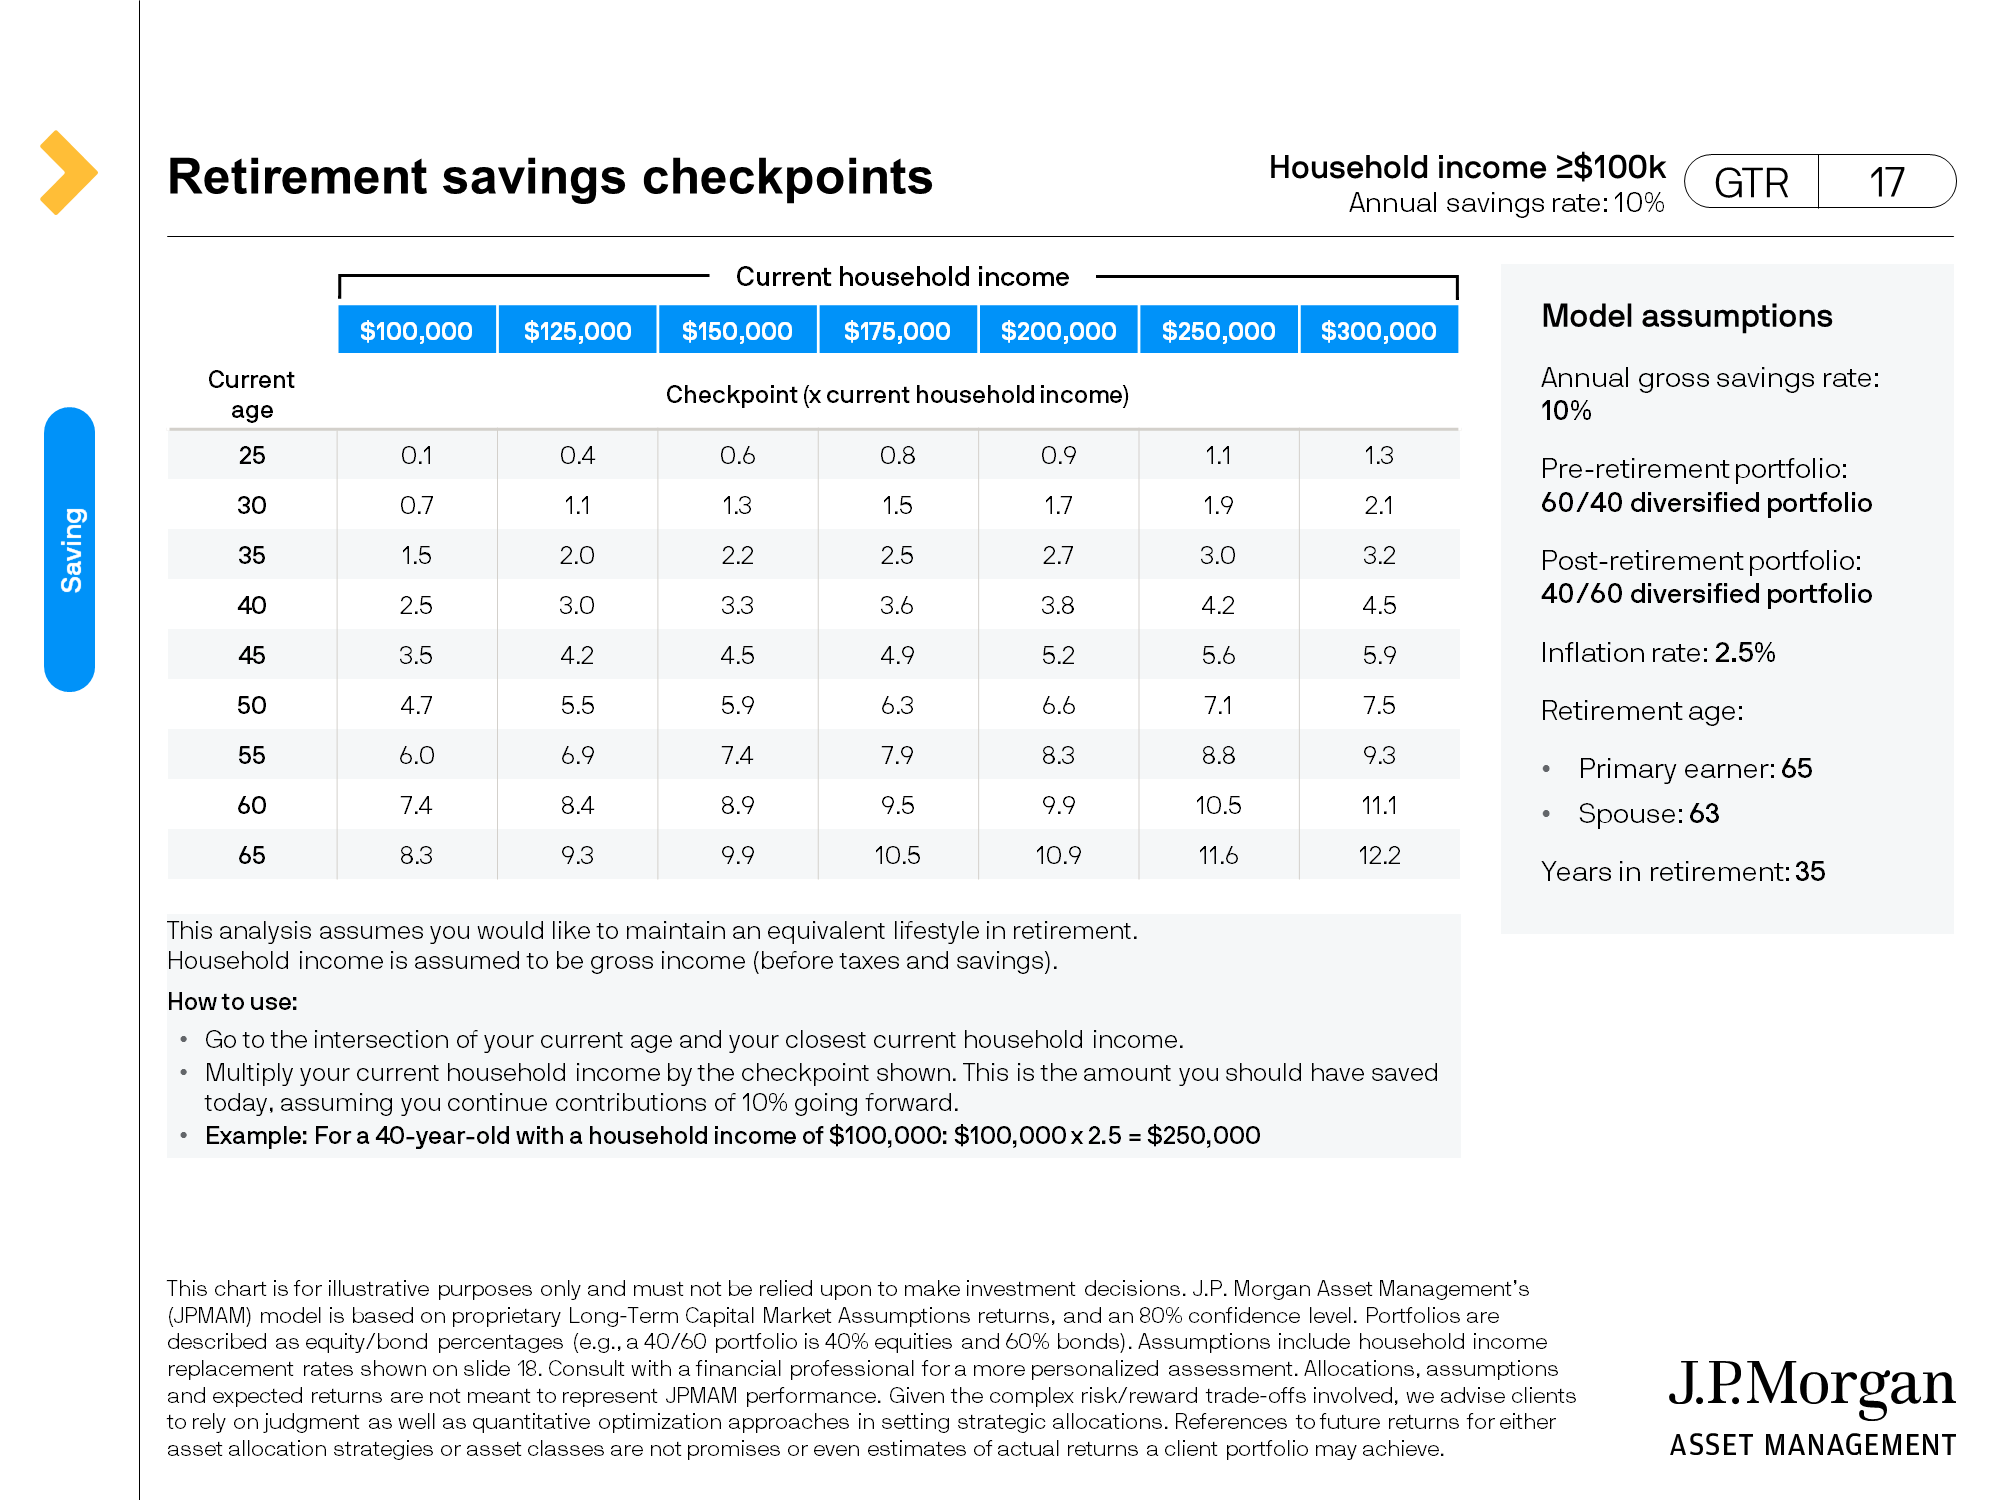 Retirement Saving checkpoints Household income (>$100k Annual savings rate 10%)